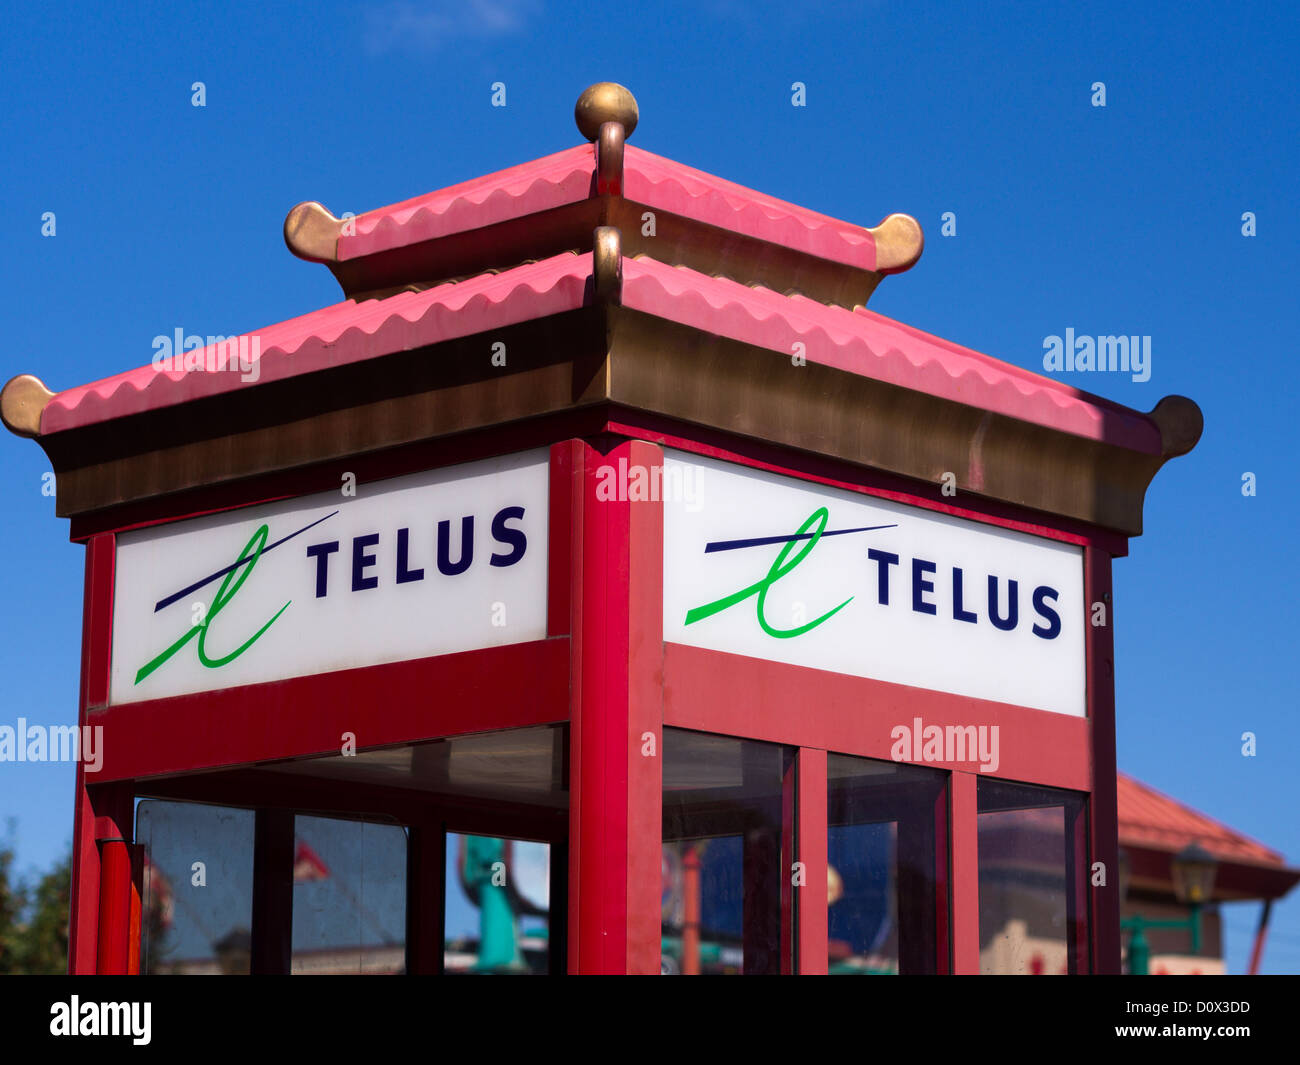 Phone booth with a Chinatown Makeover. Curled double roof dresses up a red telus phone booth in Edmonton's Chinatown. Stock Photo